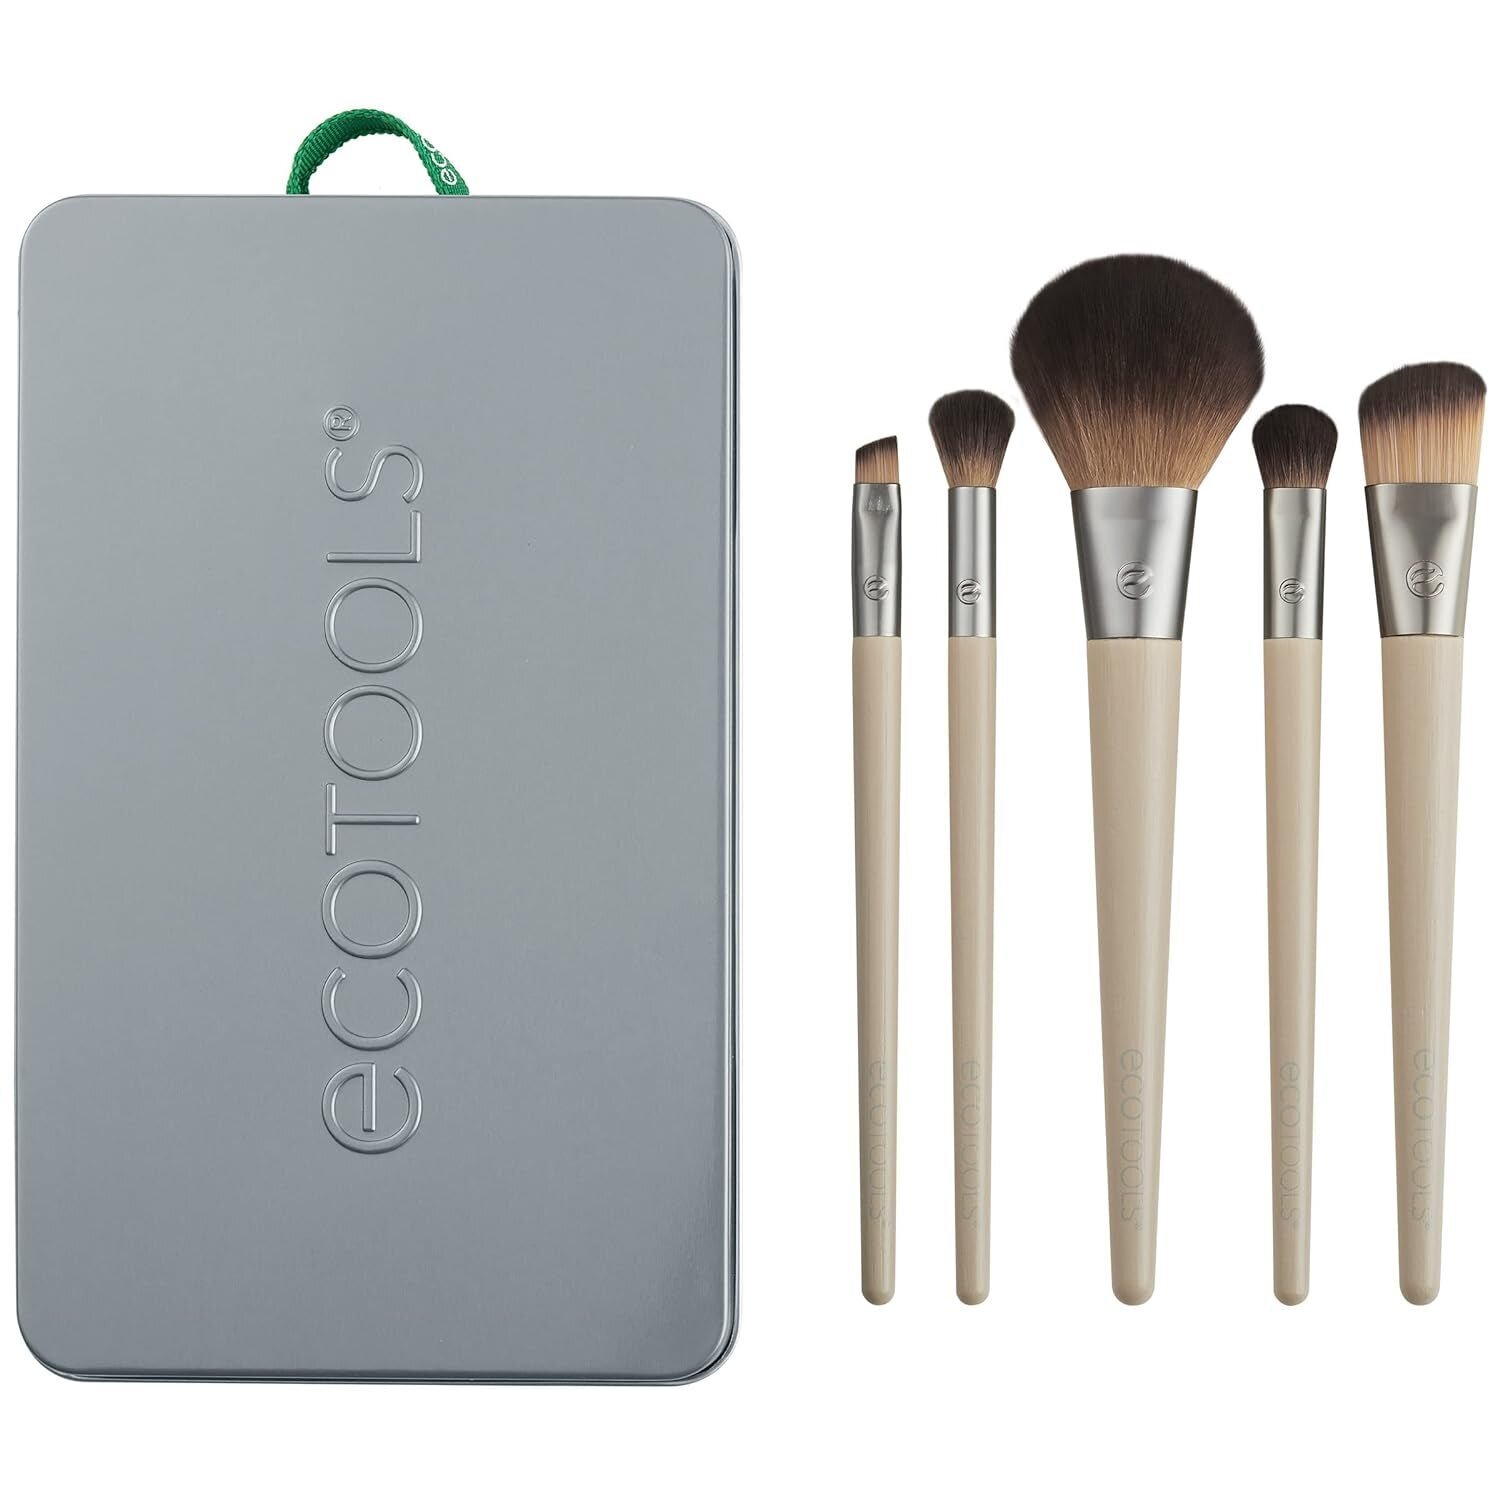 EcoTools makeup brushes set next to their gray packaging with brand logo